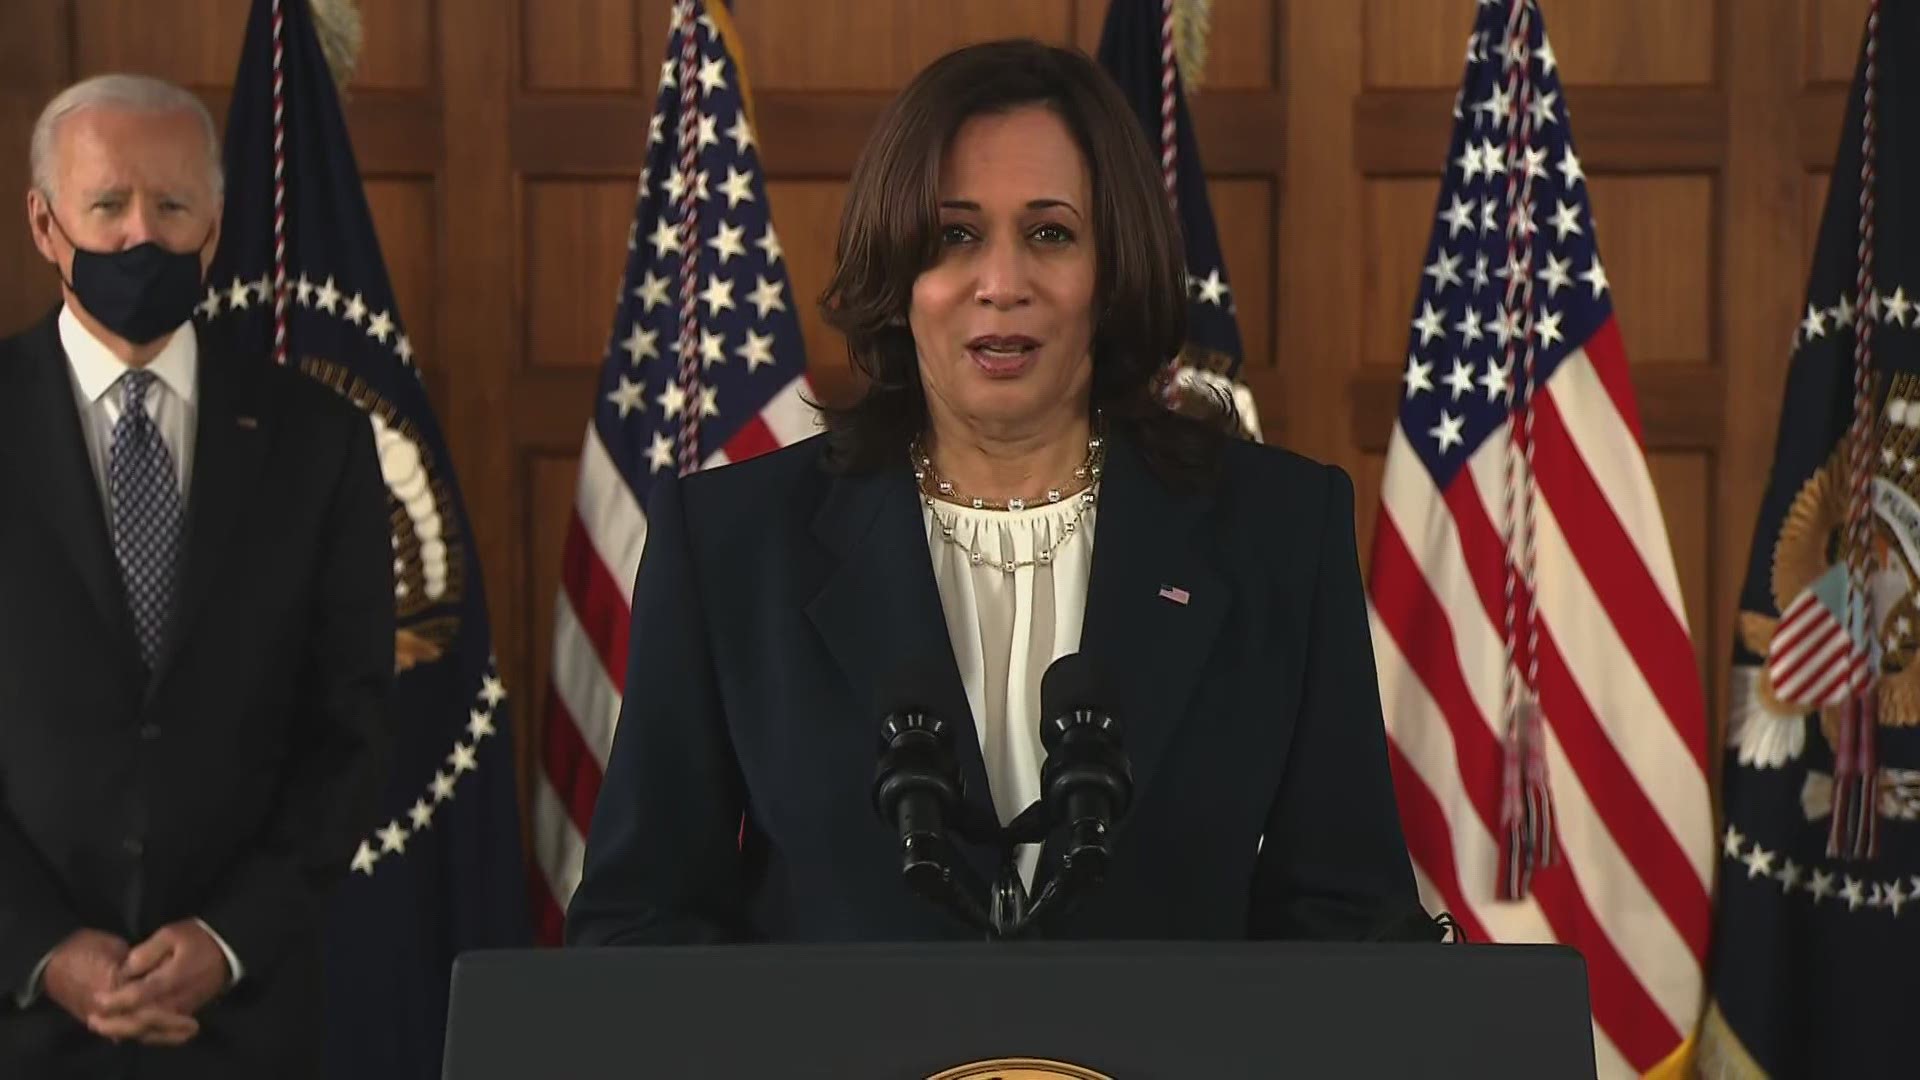 Vice President Kamala Harris speaks about the increase in anti-Asian violence across the U.S. following this week's deadly shootings at Atlanta spas.